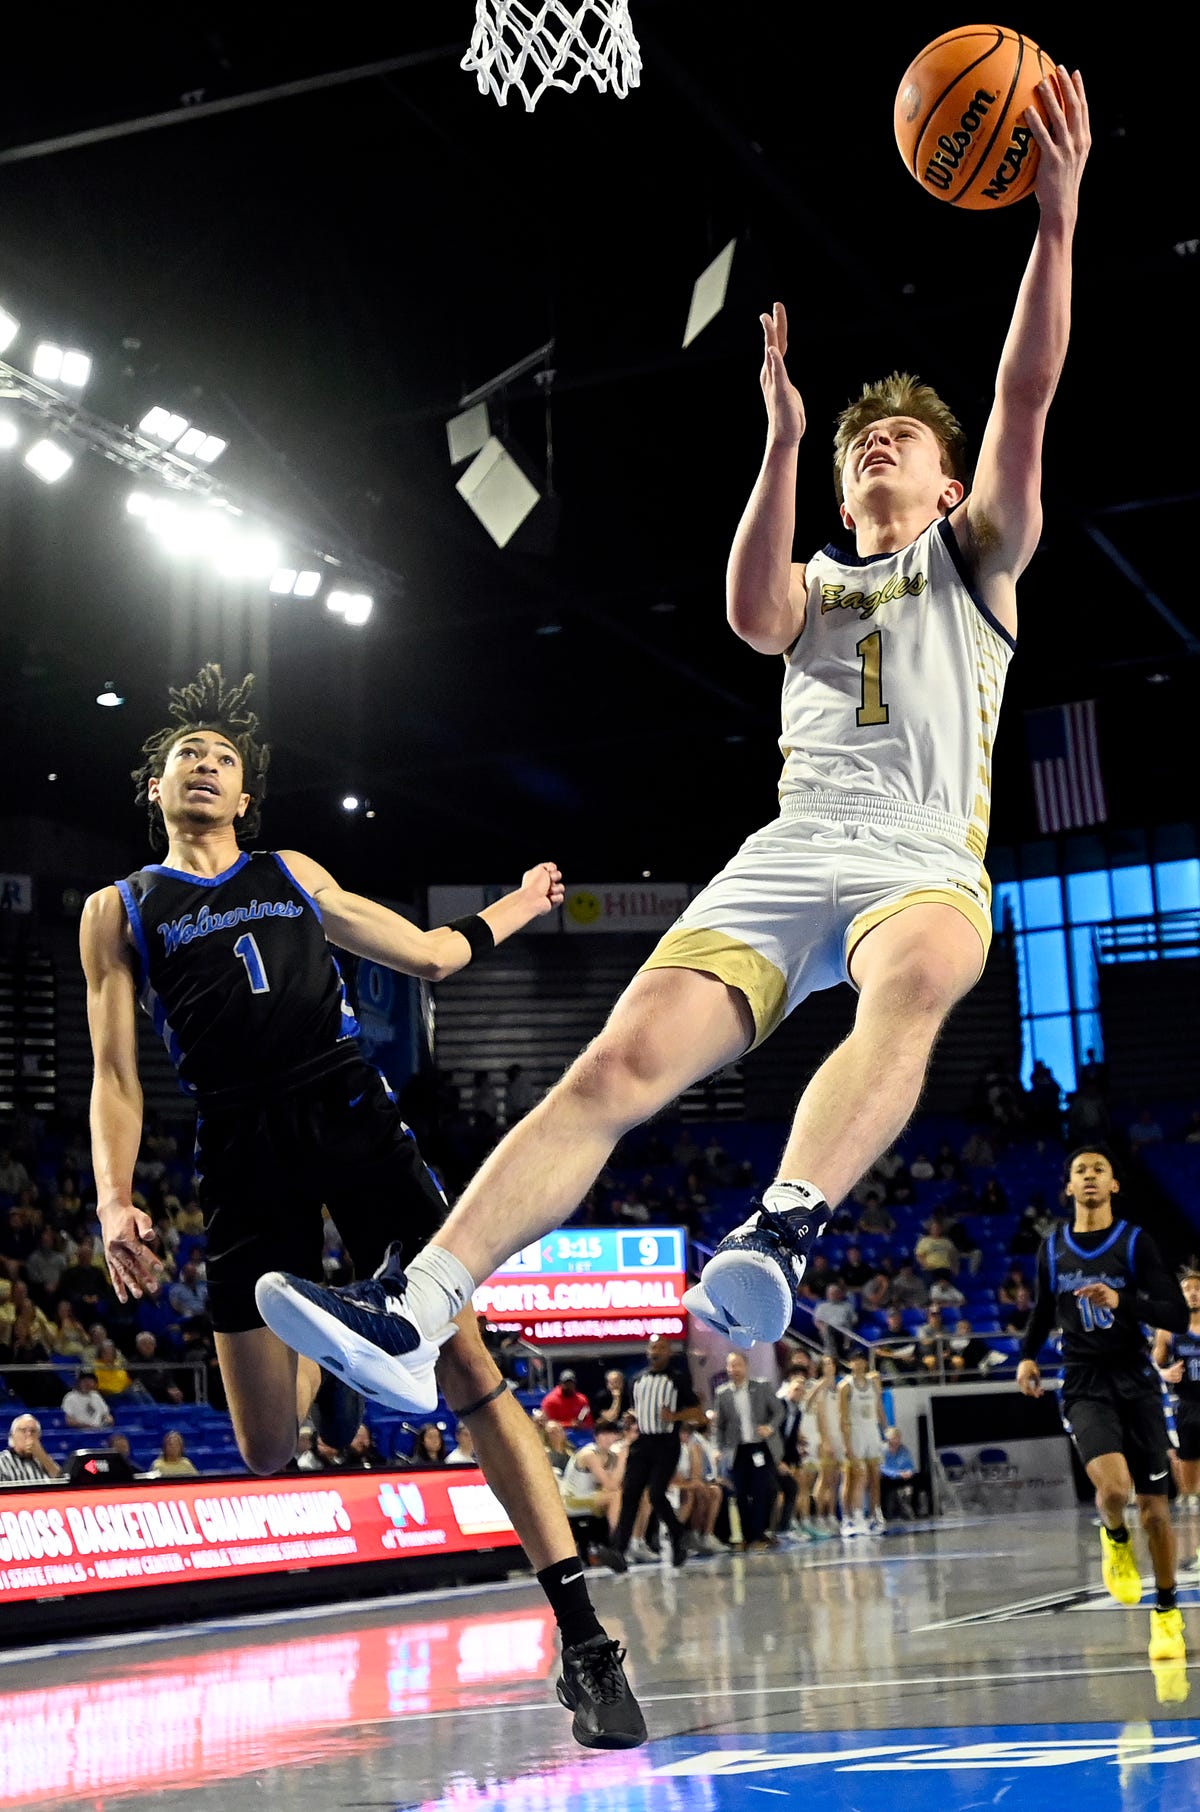 Independence’s Jett Montgomery Shines in TSSAA Class 4A Quarterfinal Win